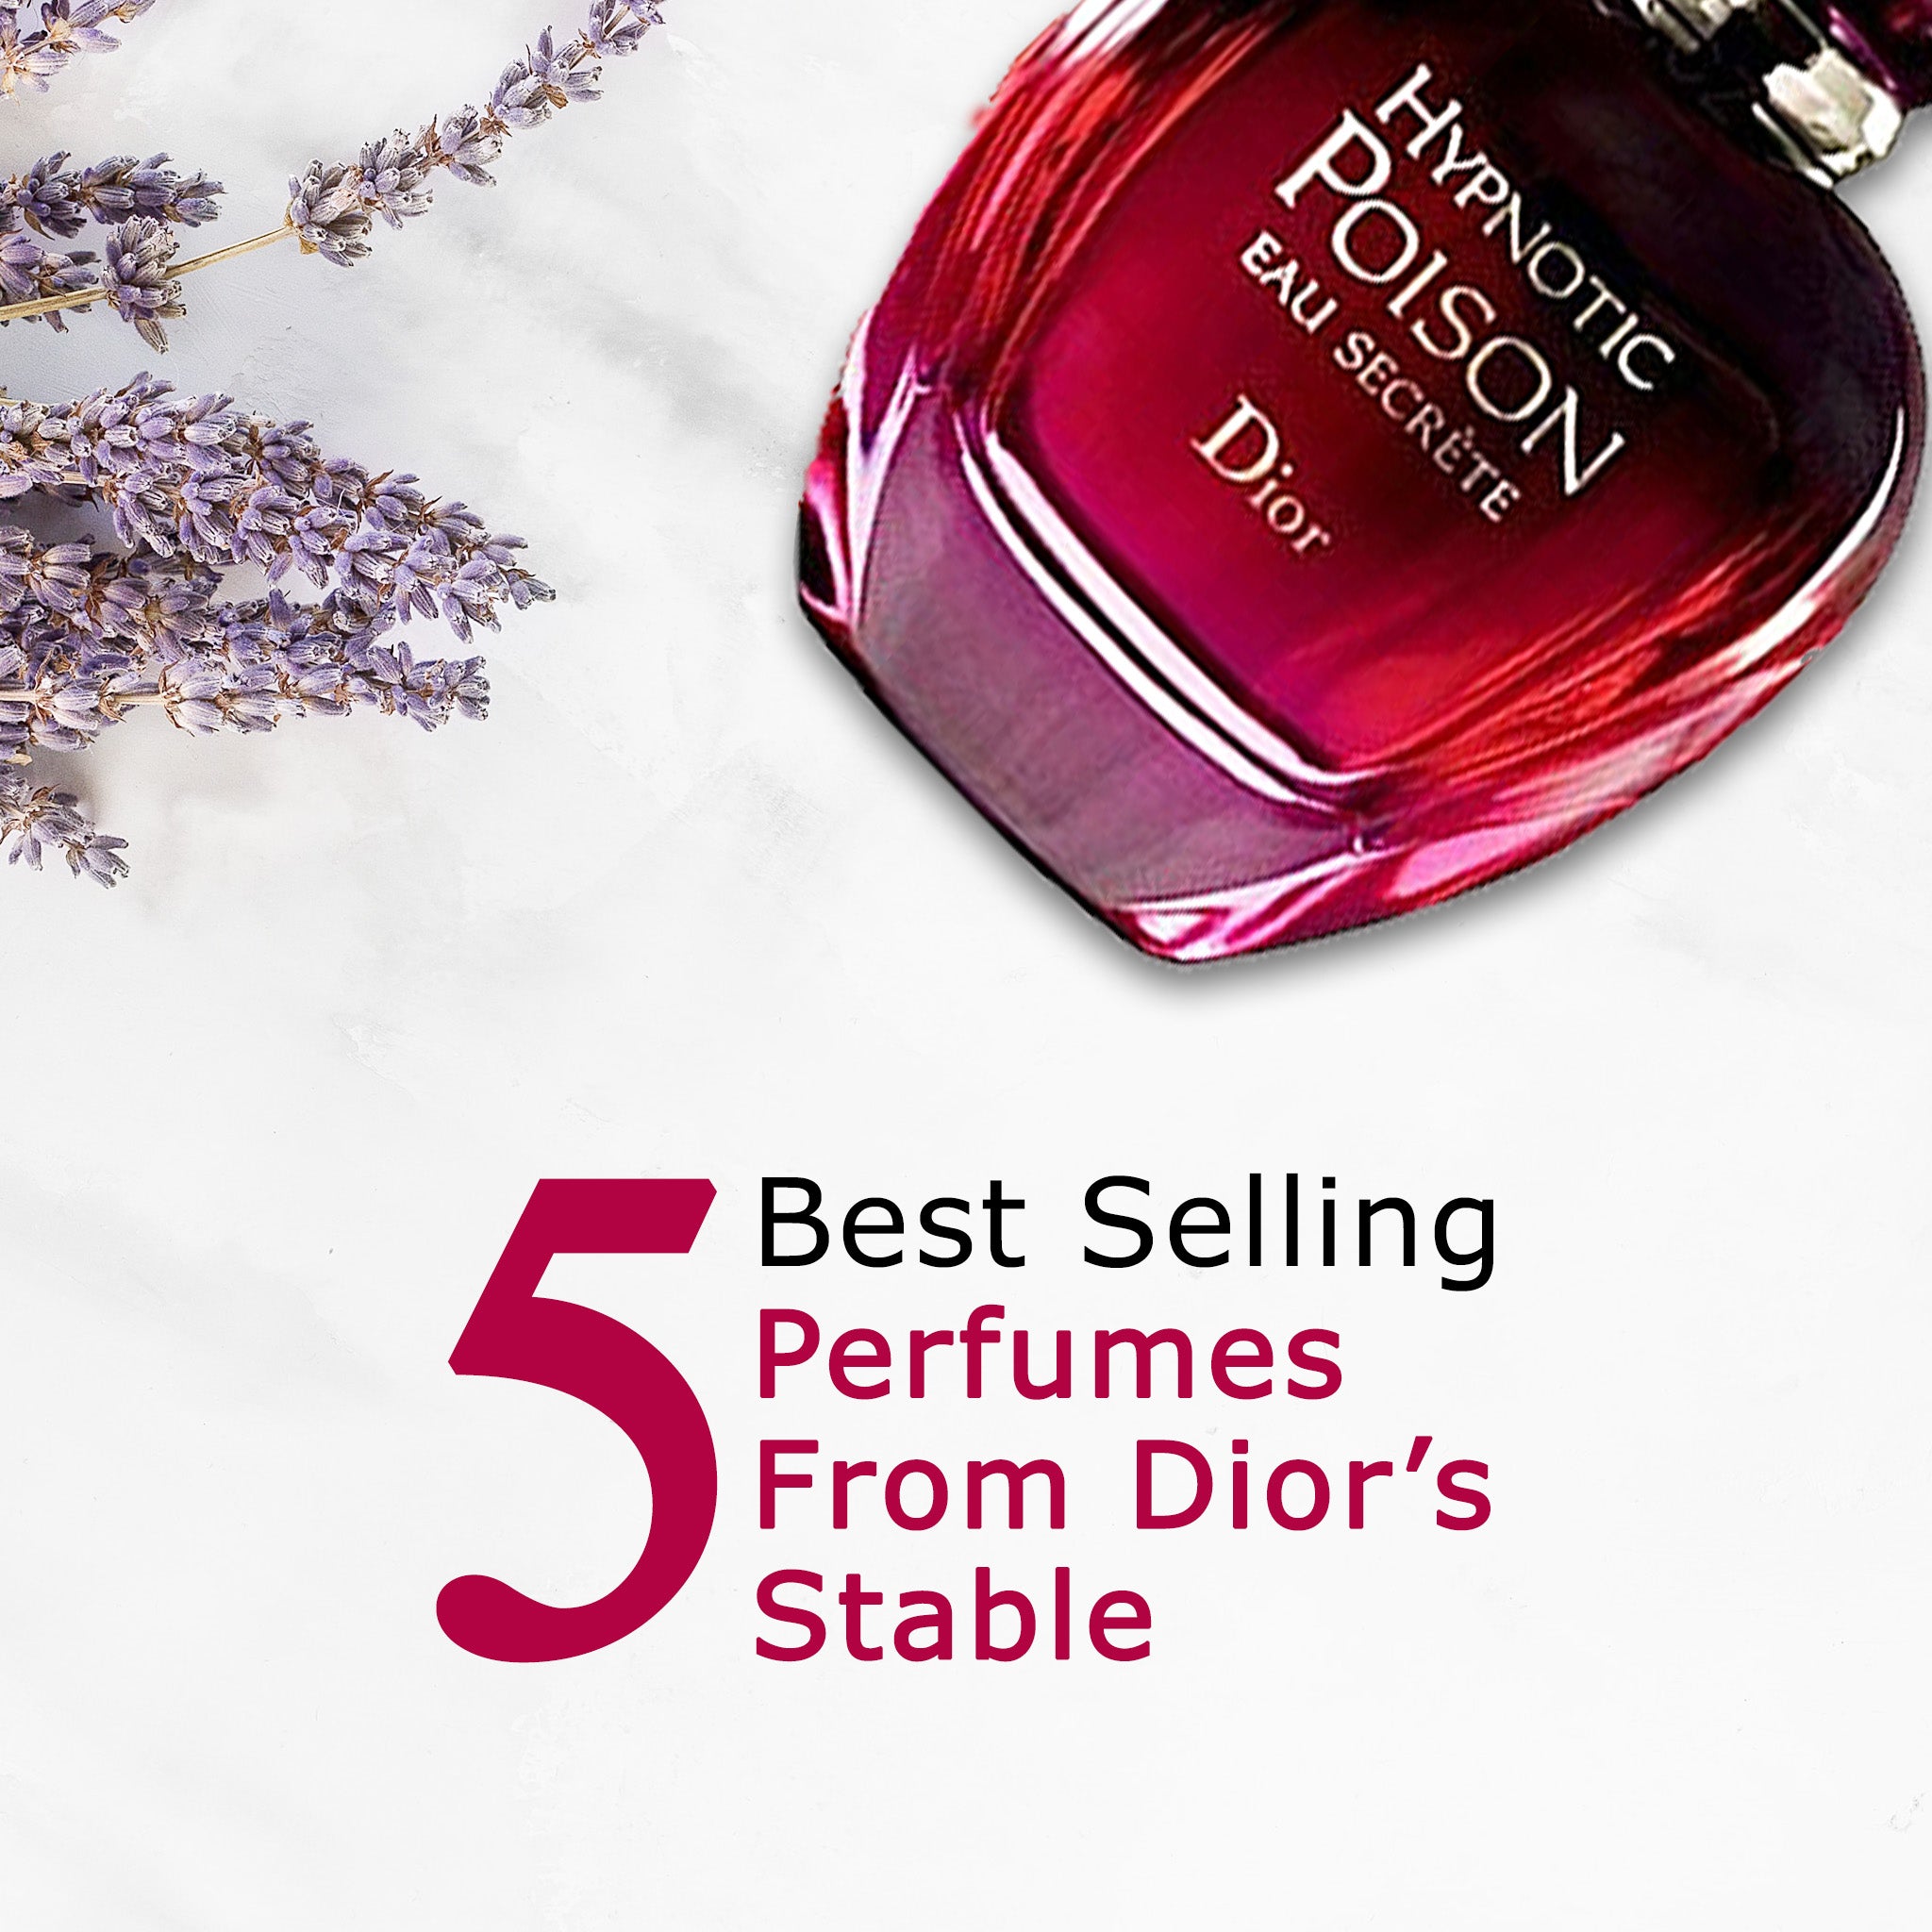 DIOR PERFUMES FOR WOMEN: 5 BEST SELLING PERFUMES FROM DIOR’S STABLE